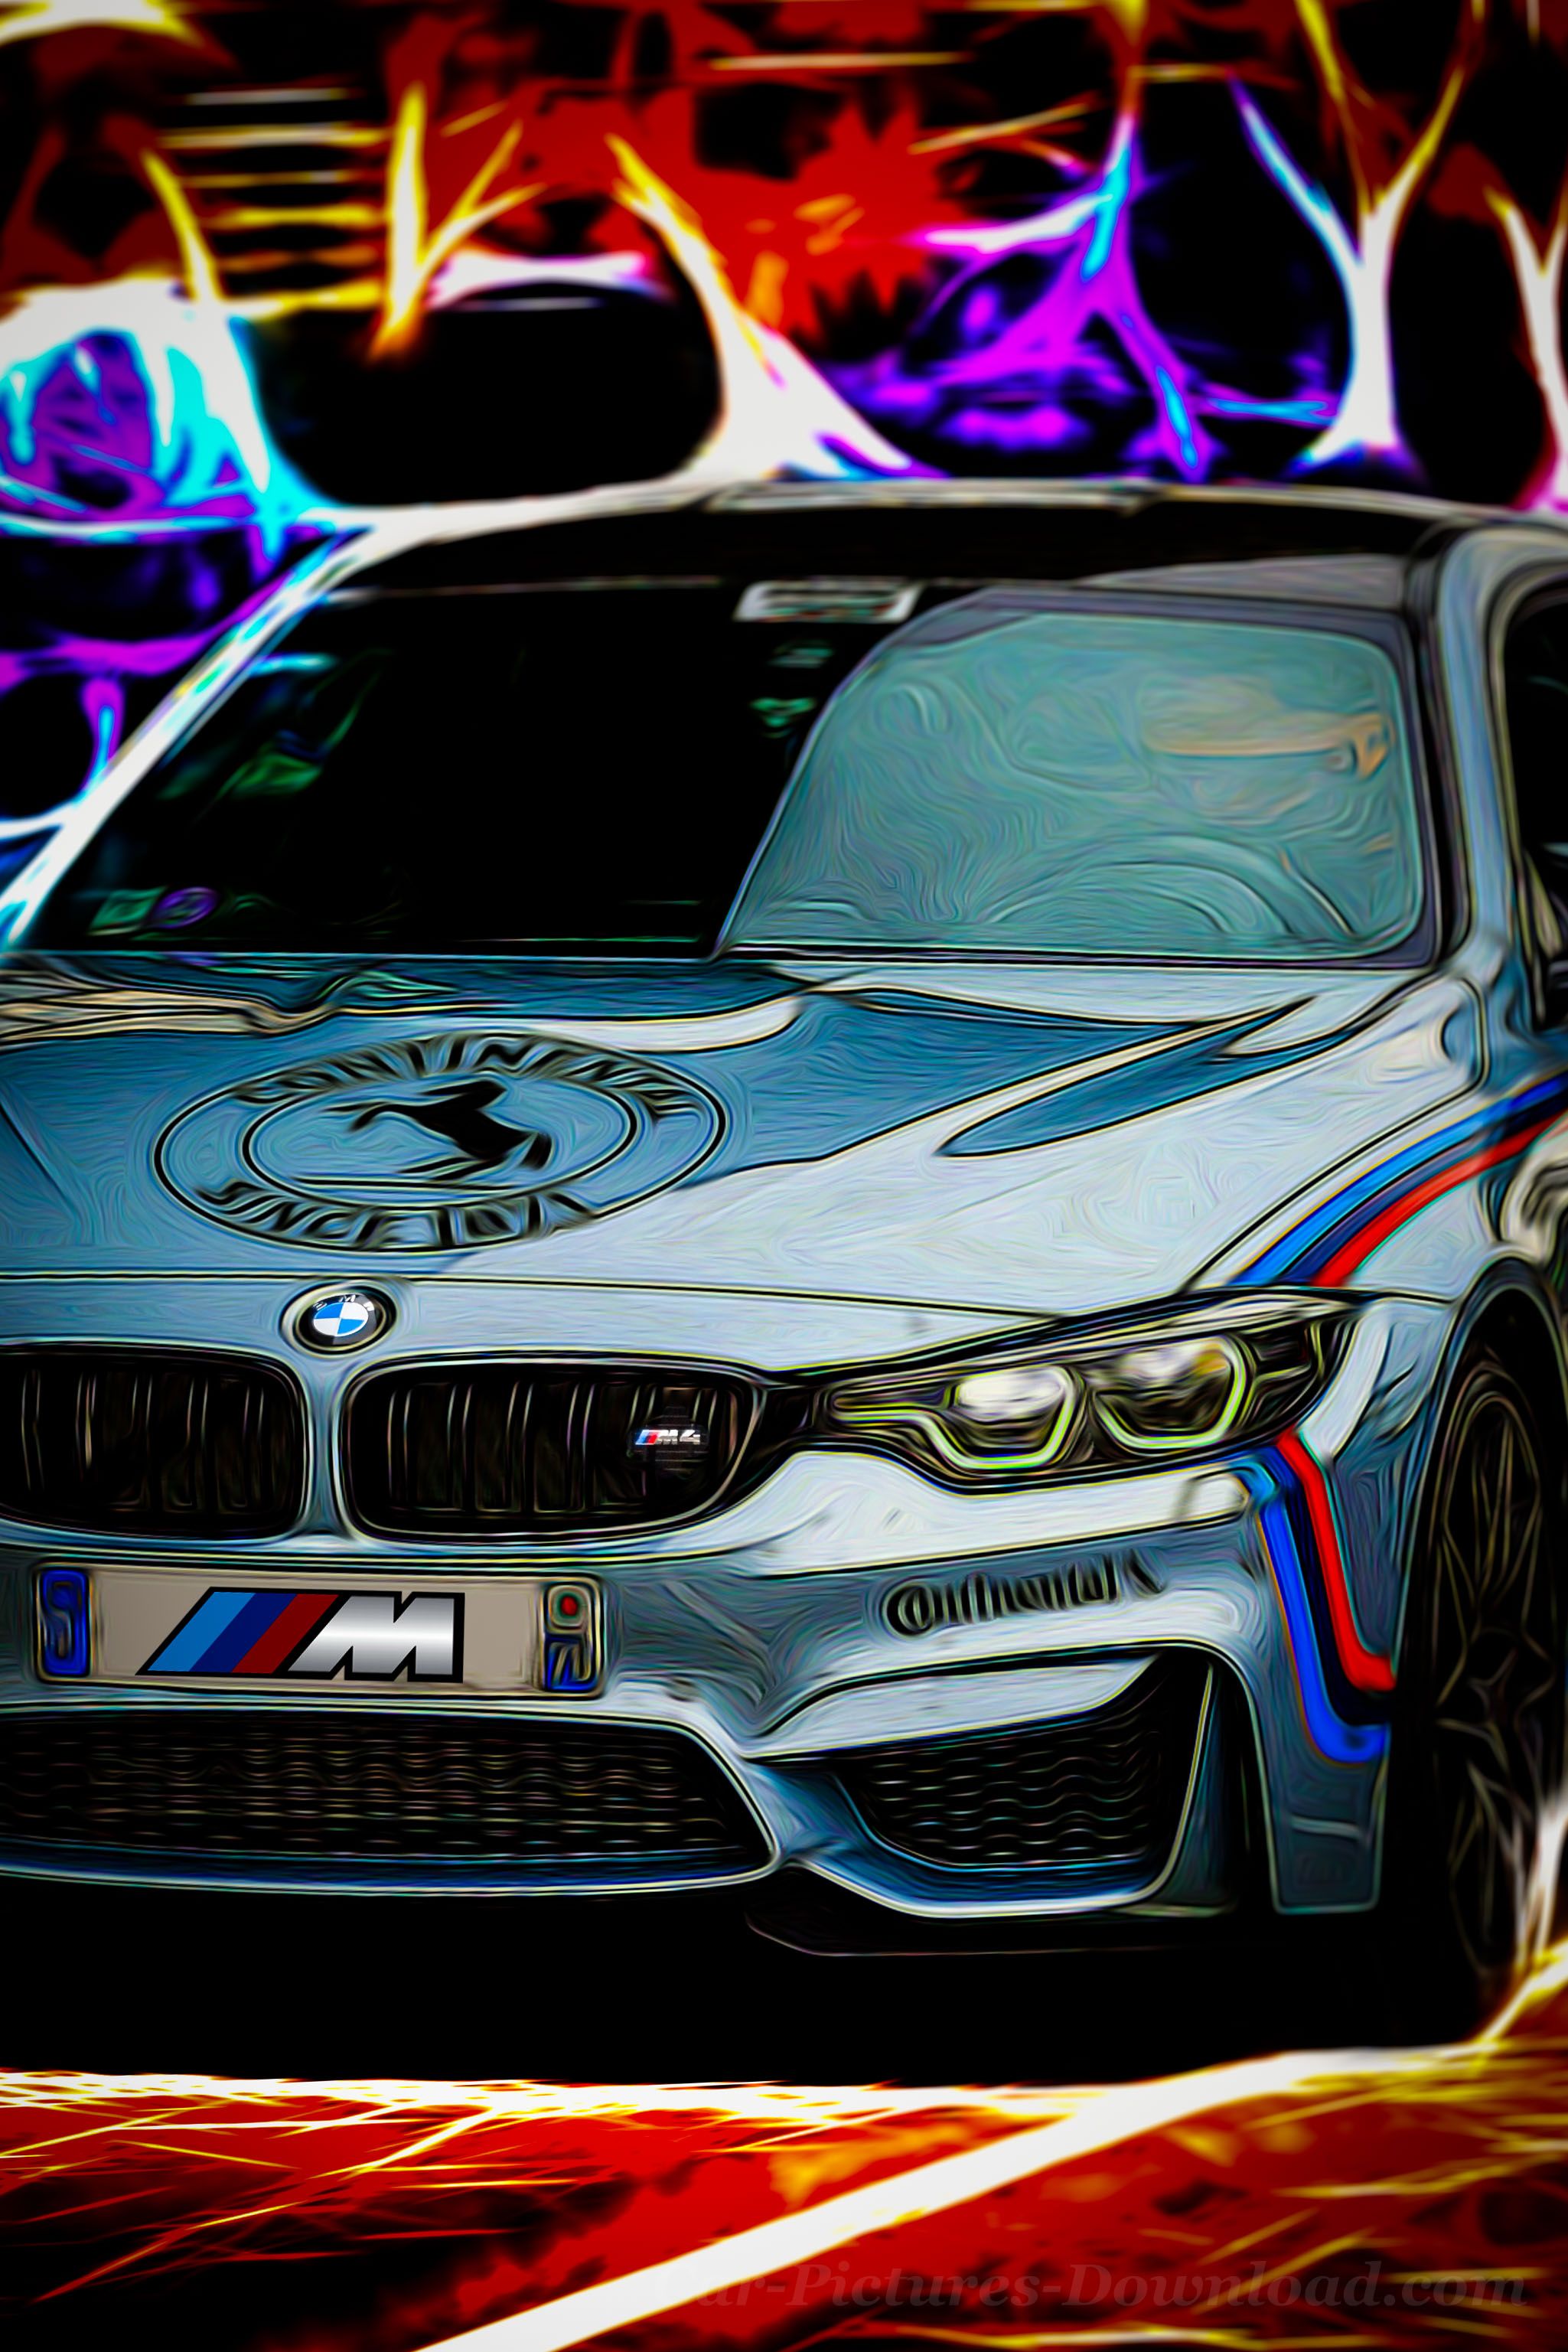 BMW M4 Wallpaper Picture HD Image Download All Devices